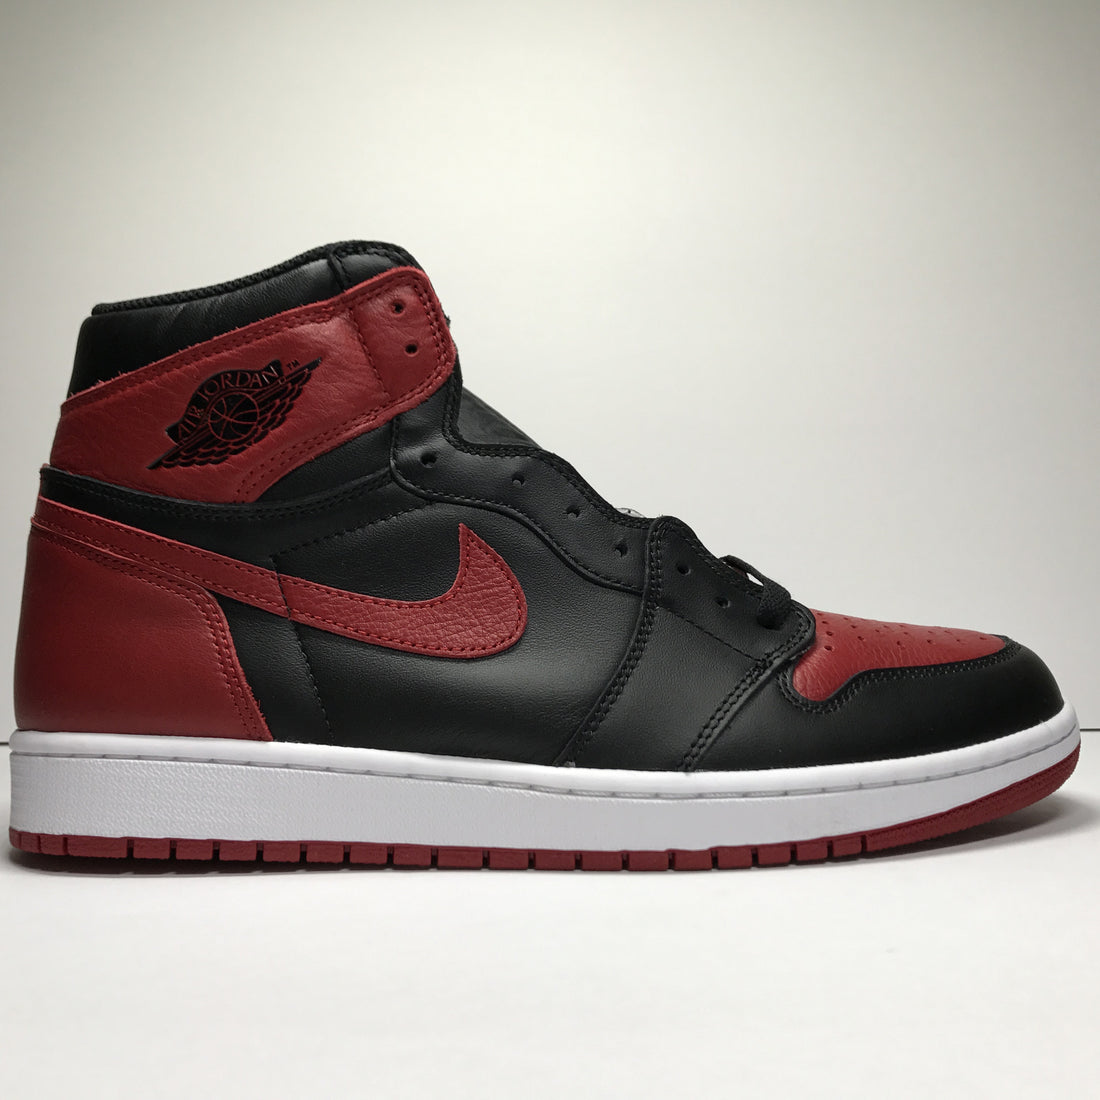 Jordan 1 Banned Bred 2016 Real vs Fake Guide - Photos, Videos, and